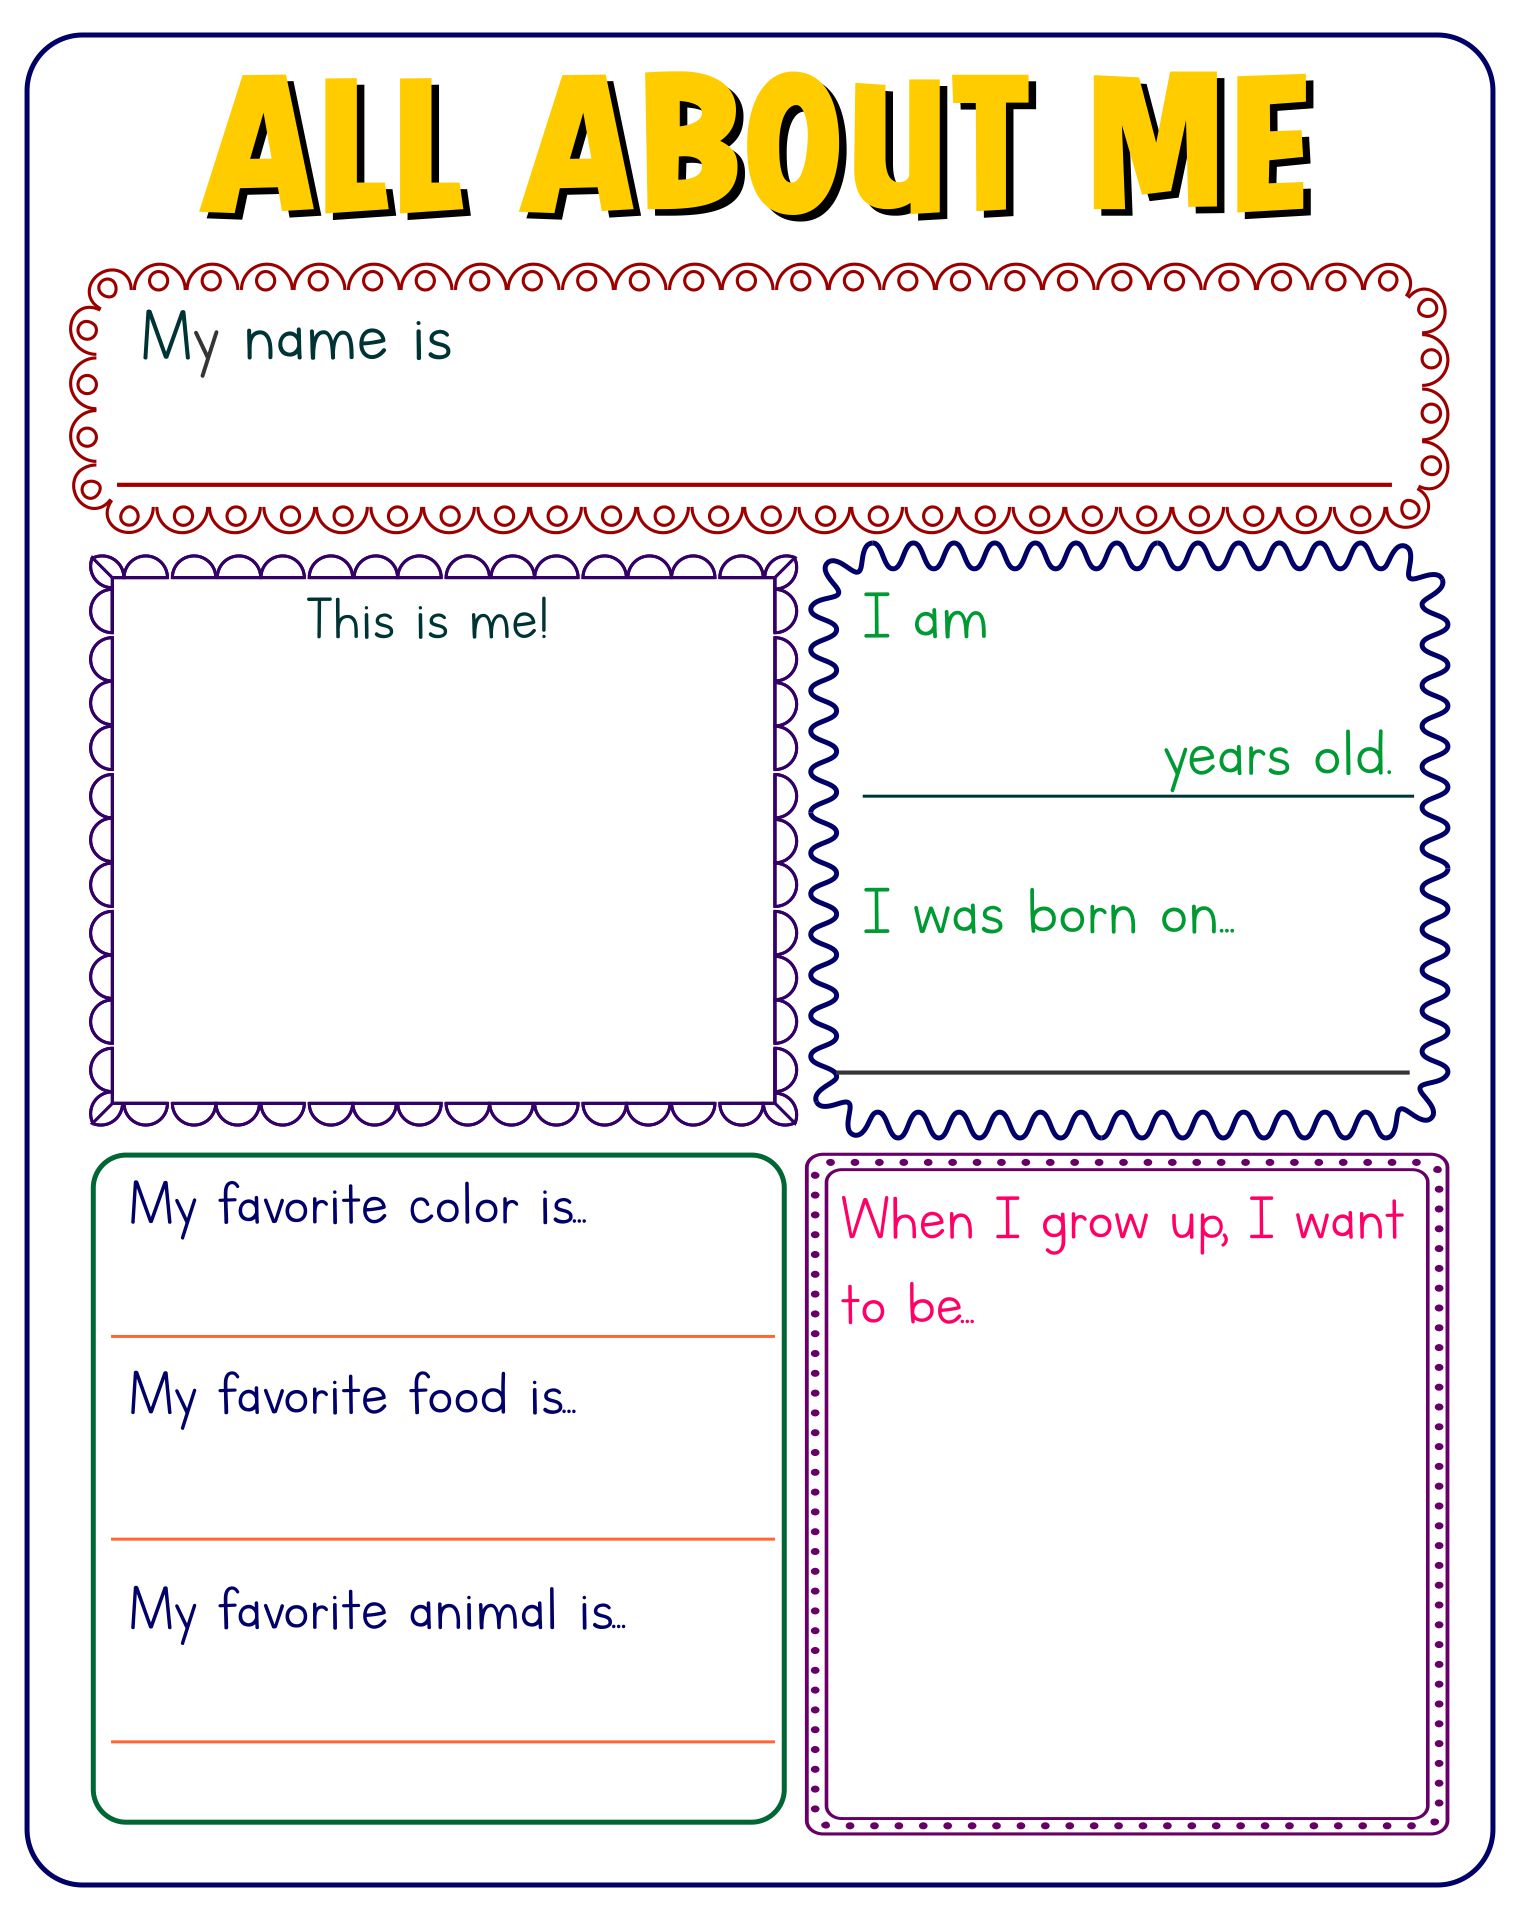 10 Best All About Me Printable Template Printablee